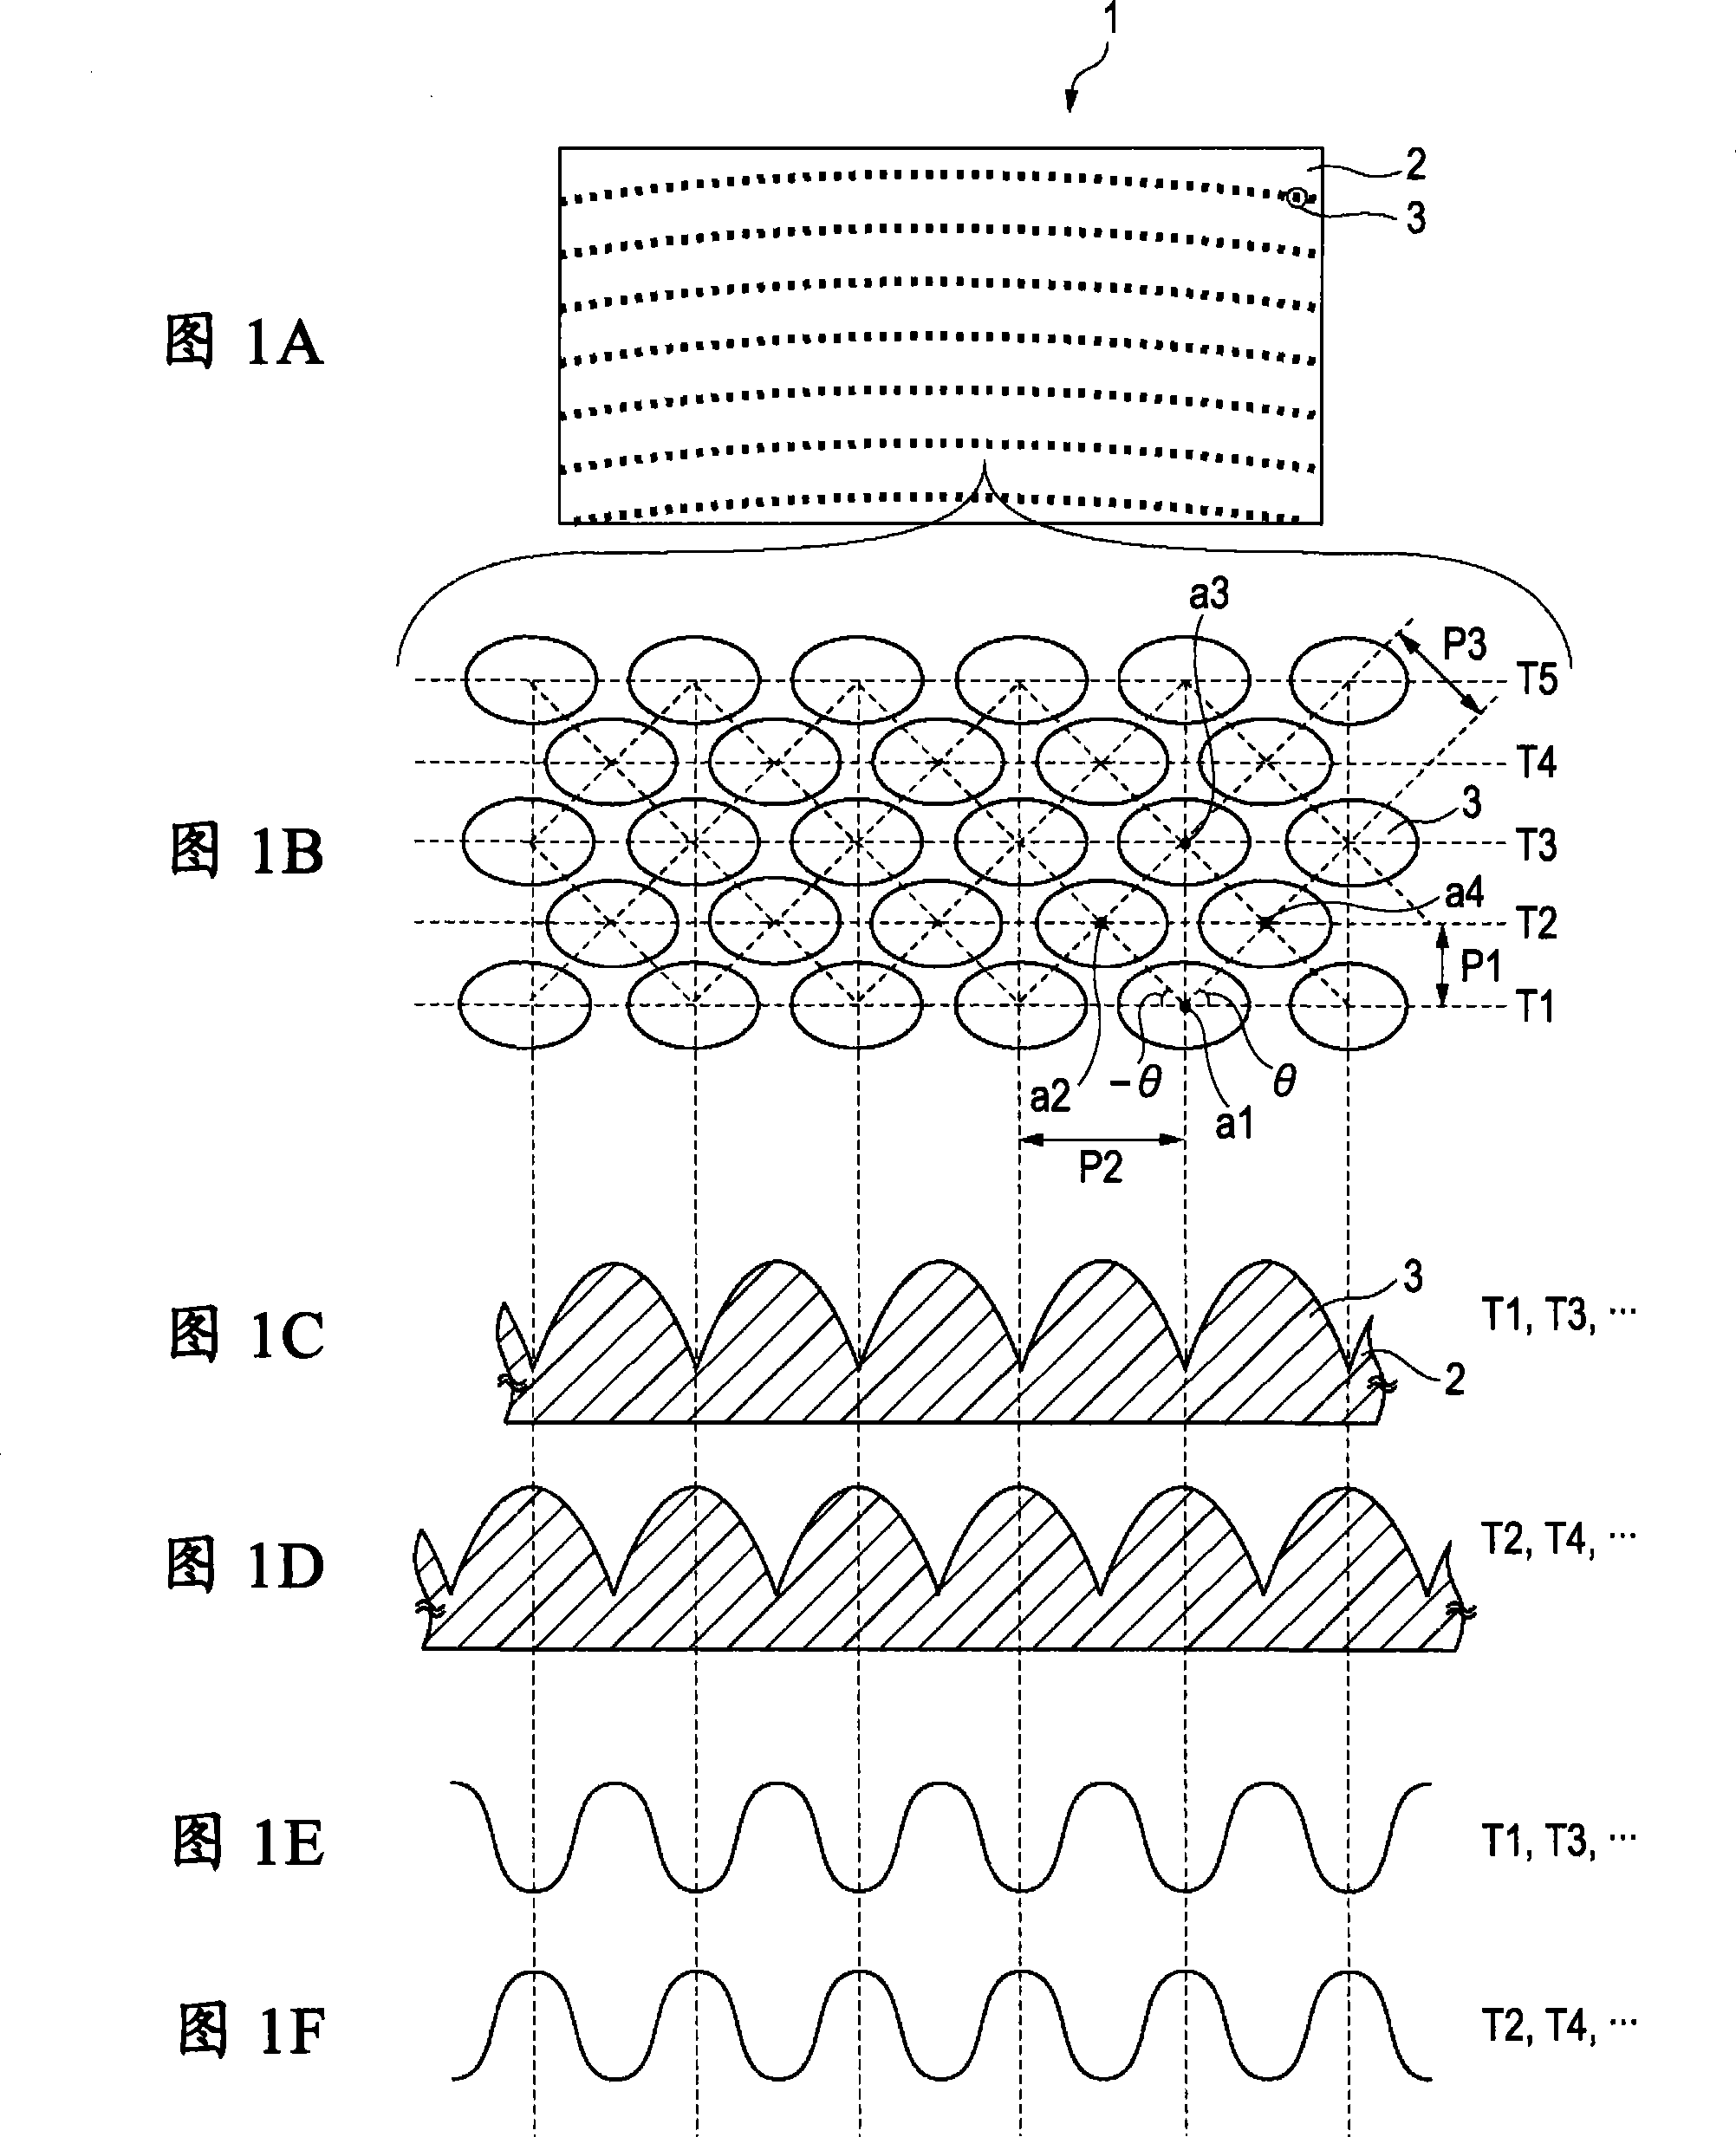 Optical element, method for producing same, replica substrate configured to form optical element, and method for producing replica substrate